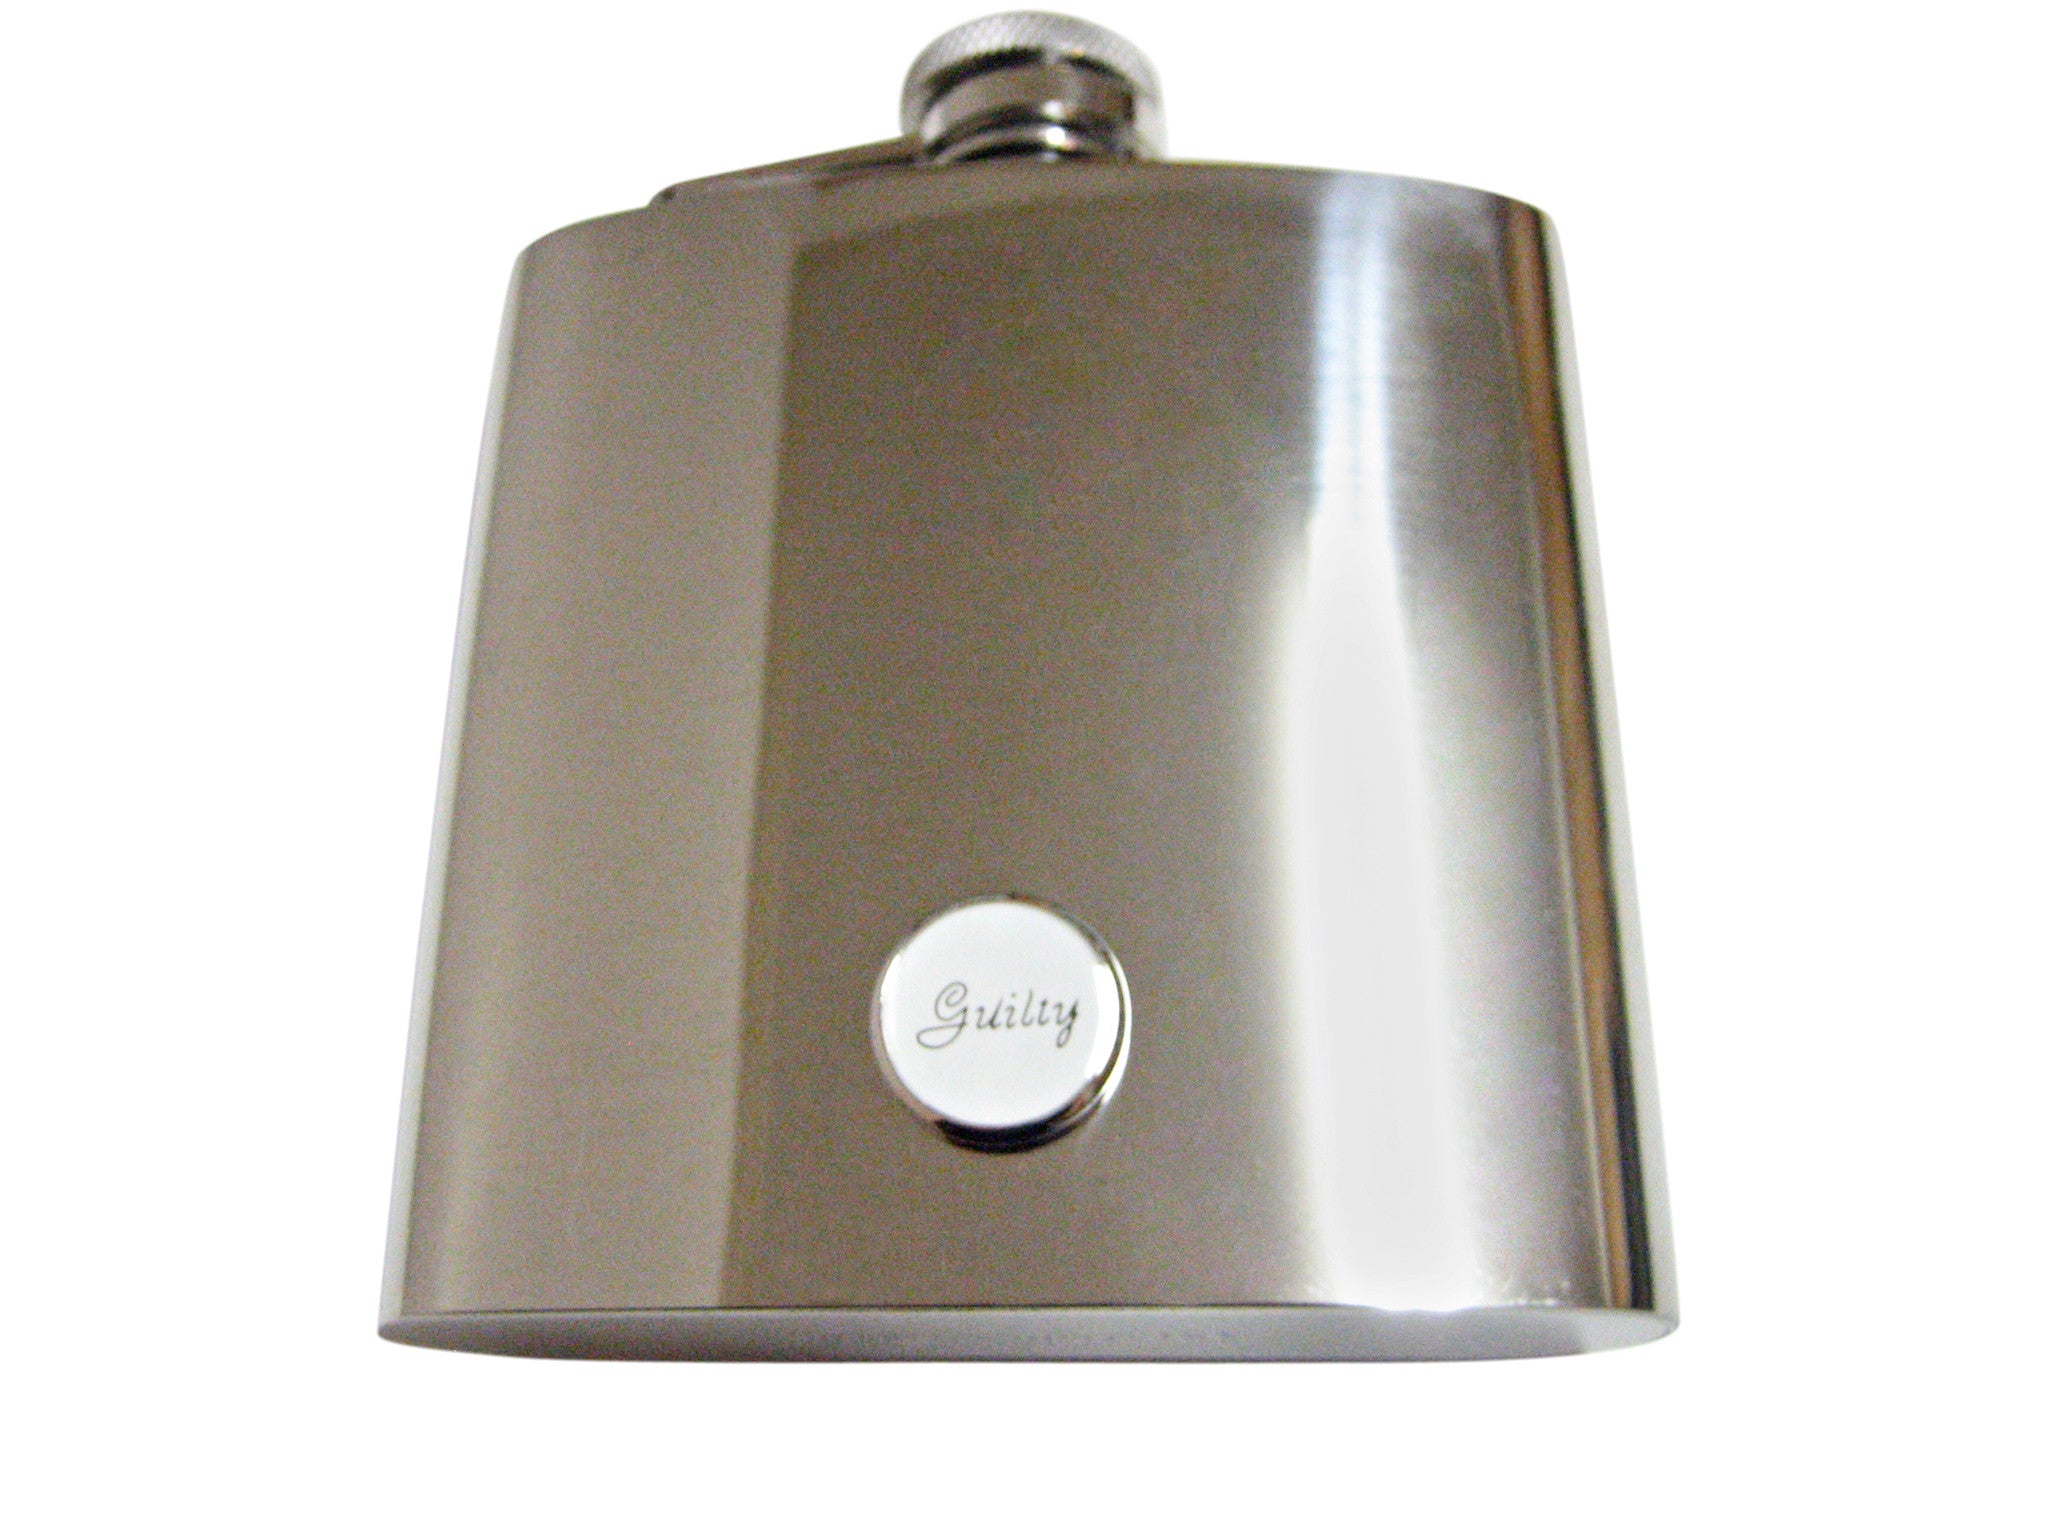 Guilty Law 6 Oz. Stainless Steel Flask